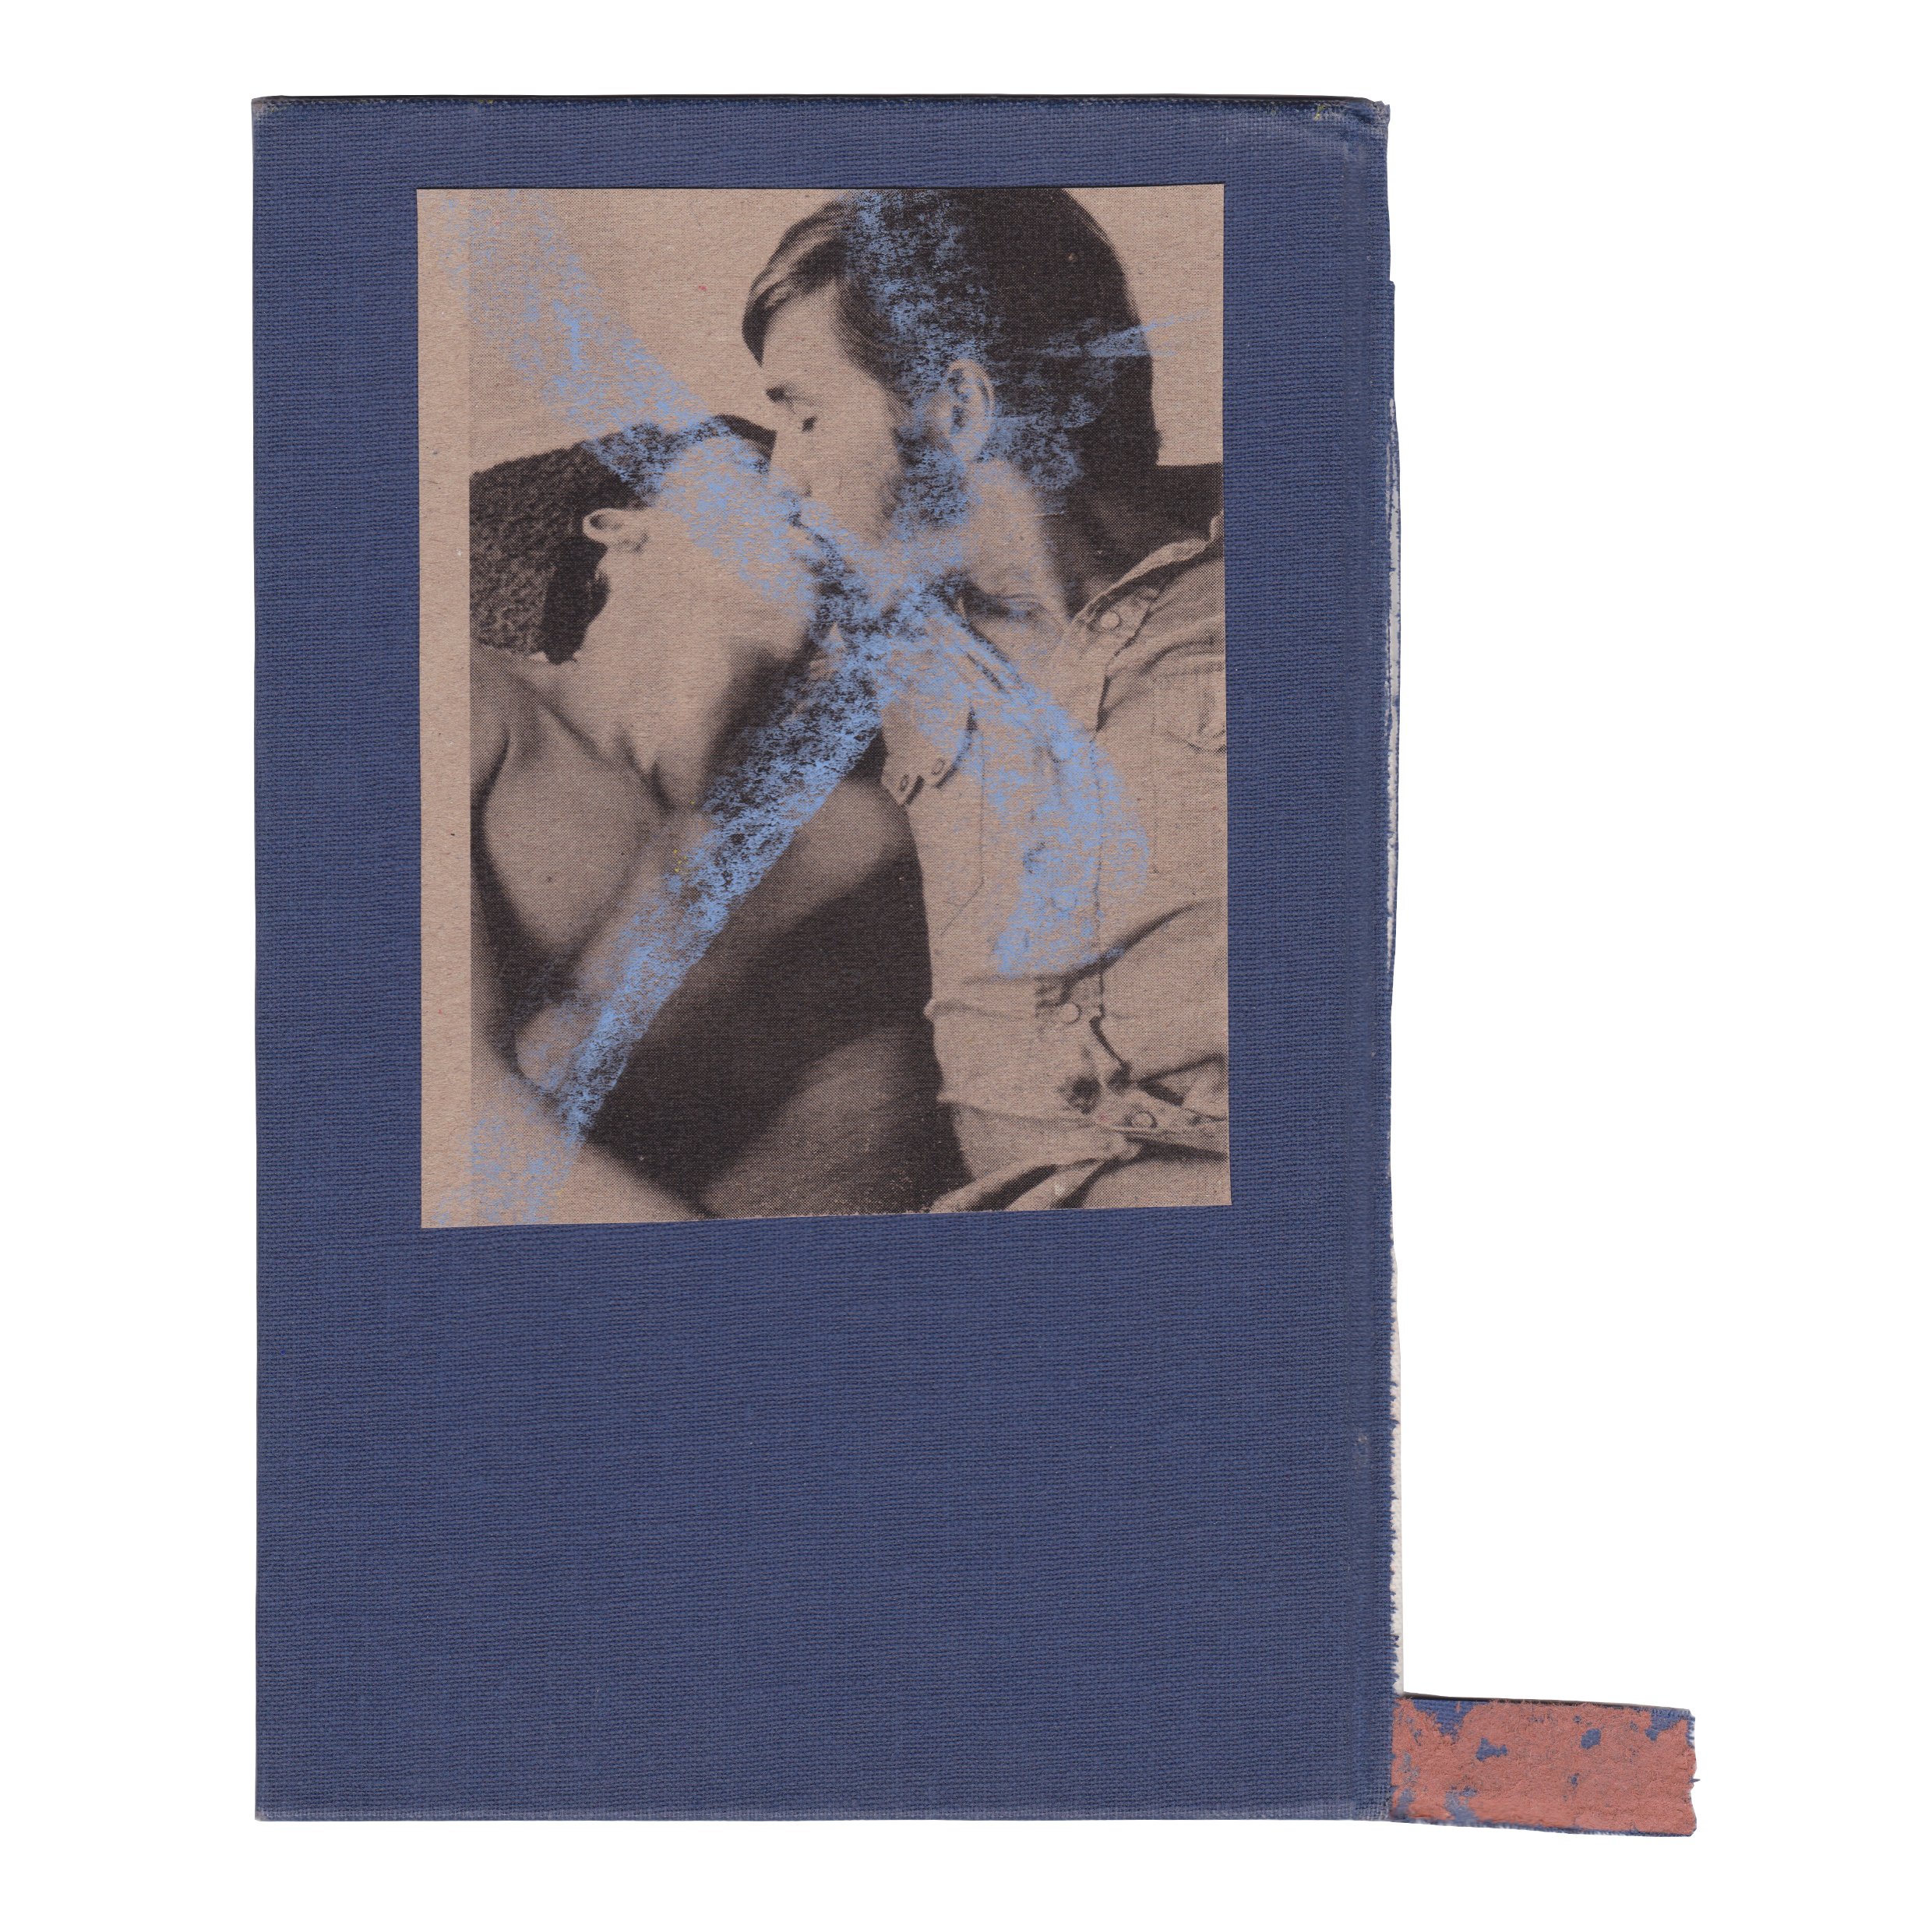  FRAGMENTS - paper collage, crayon on vintage book cover, signed on the back  (2022)  (16x18,9cm) 